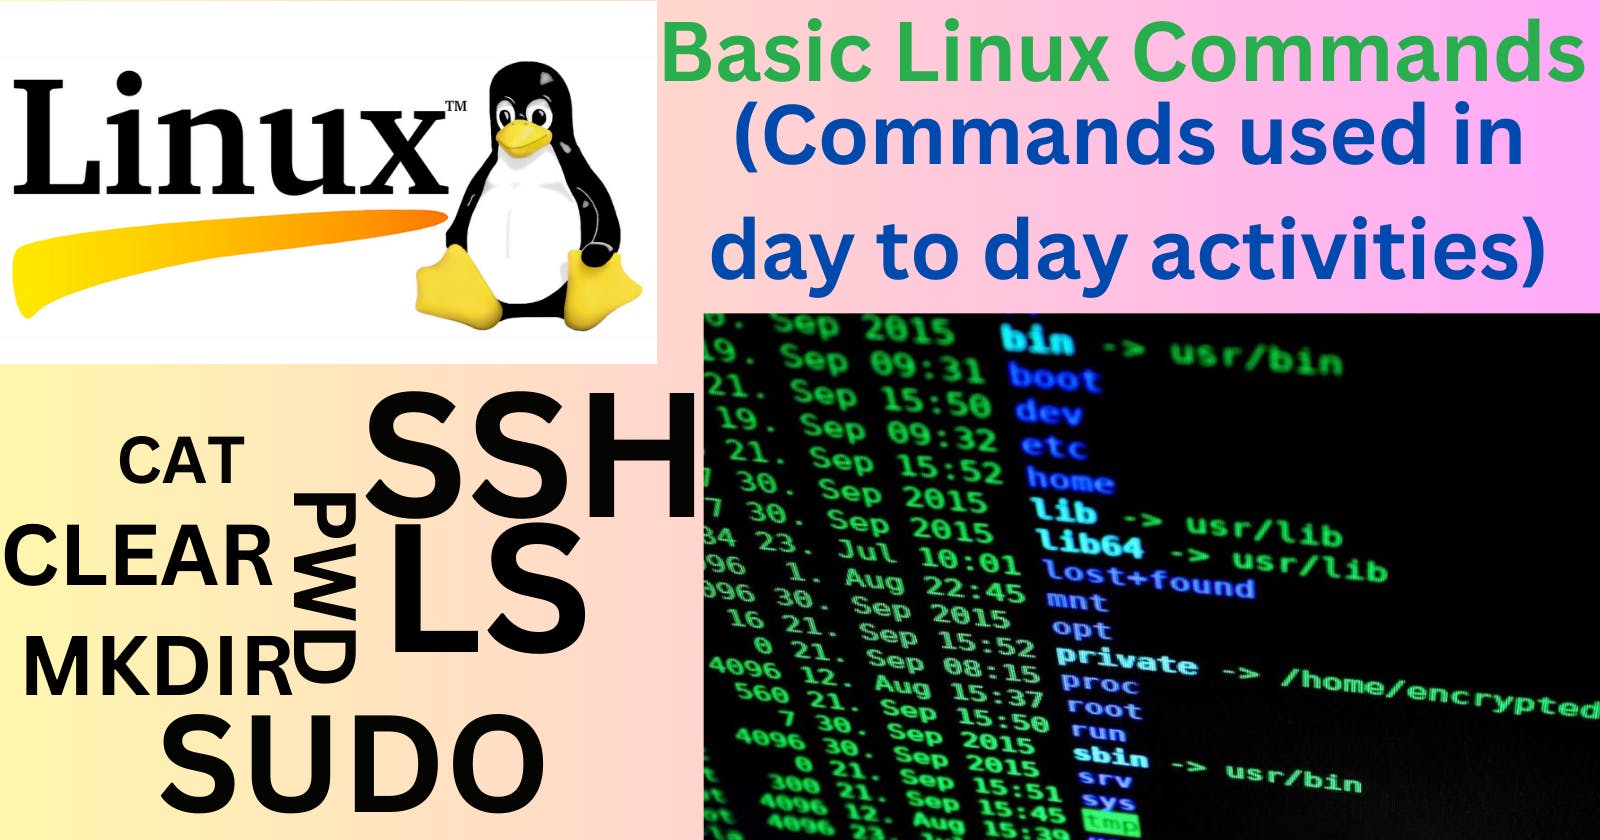 Linux Commands for DevOps used in in day-to-day activities.